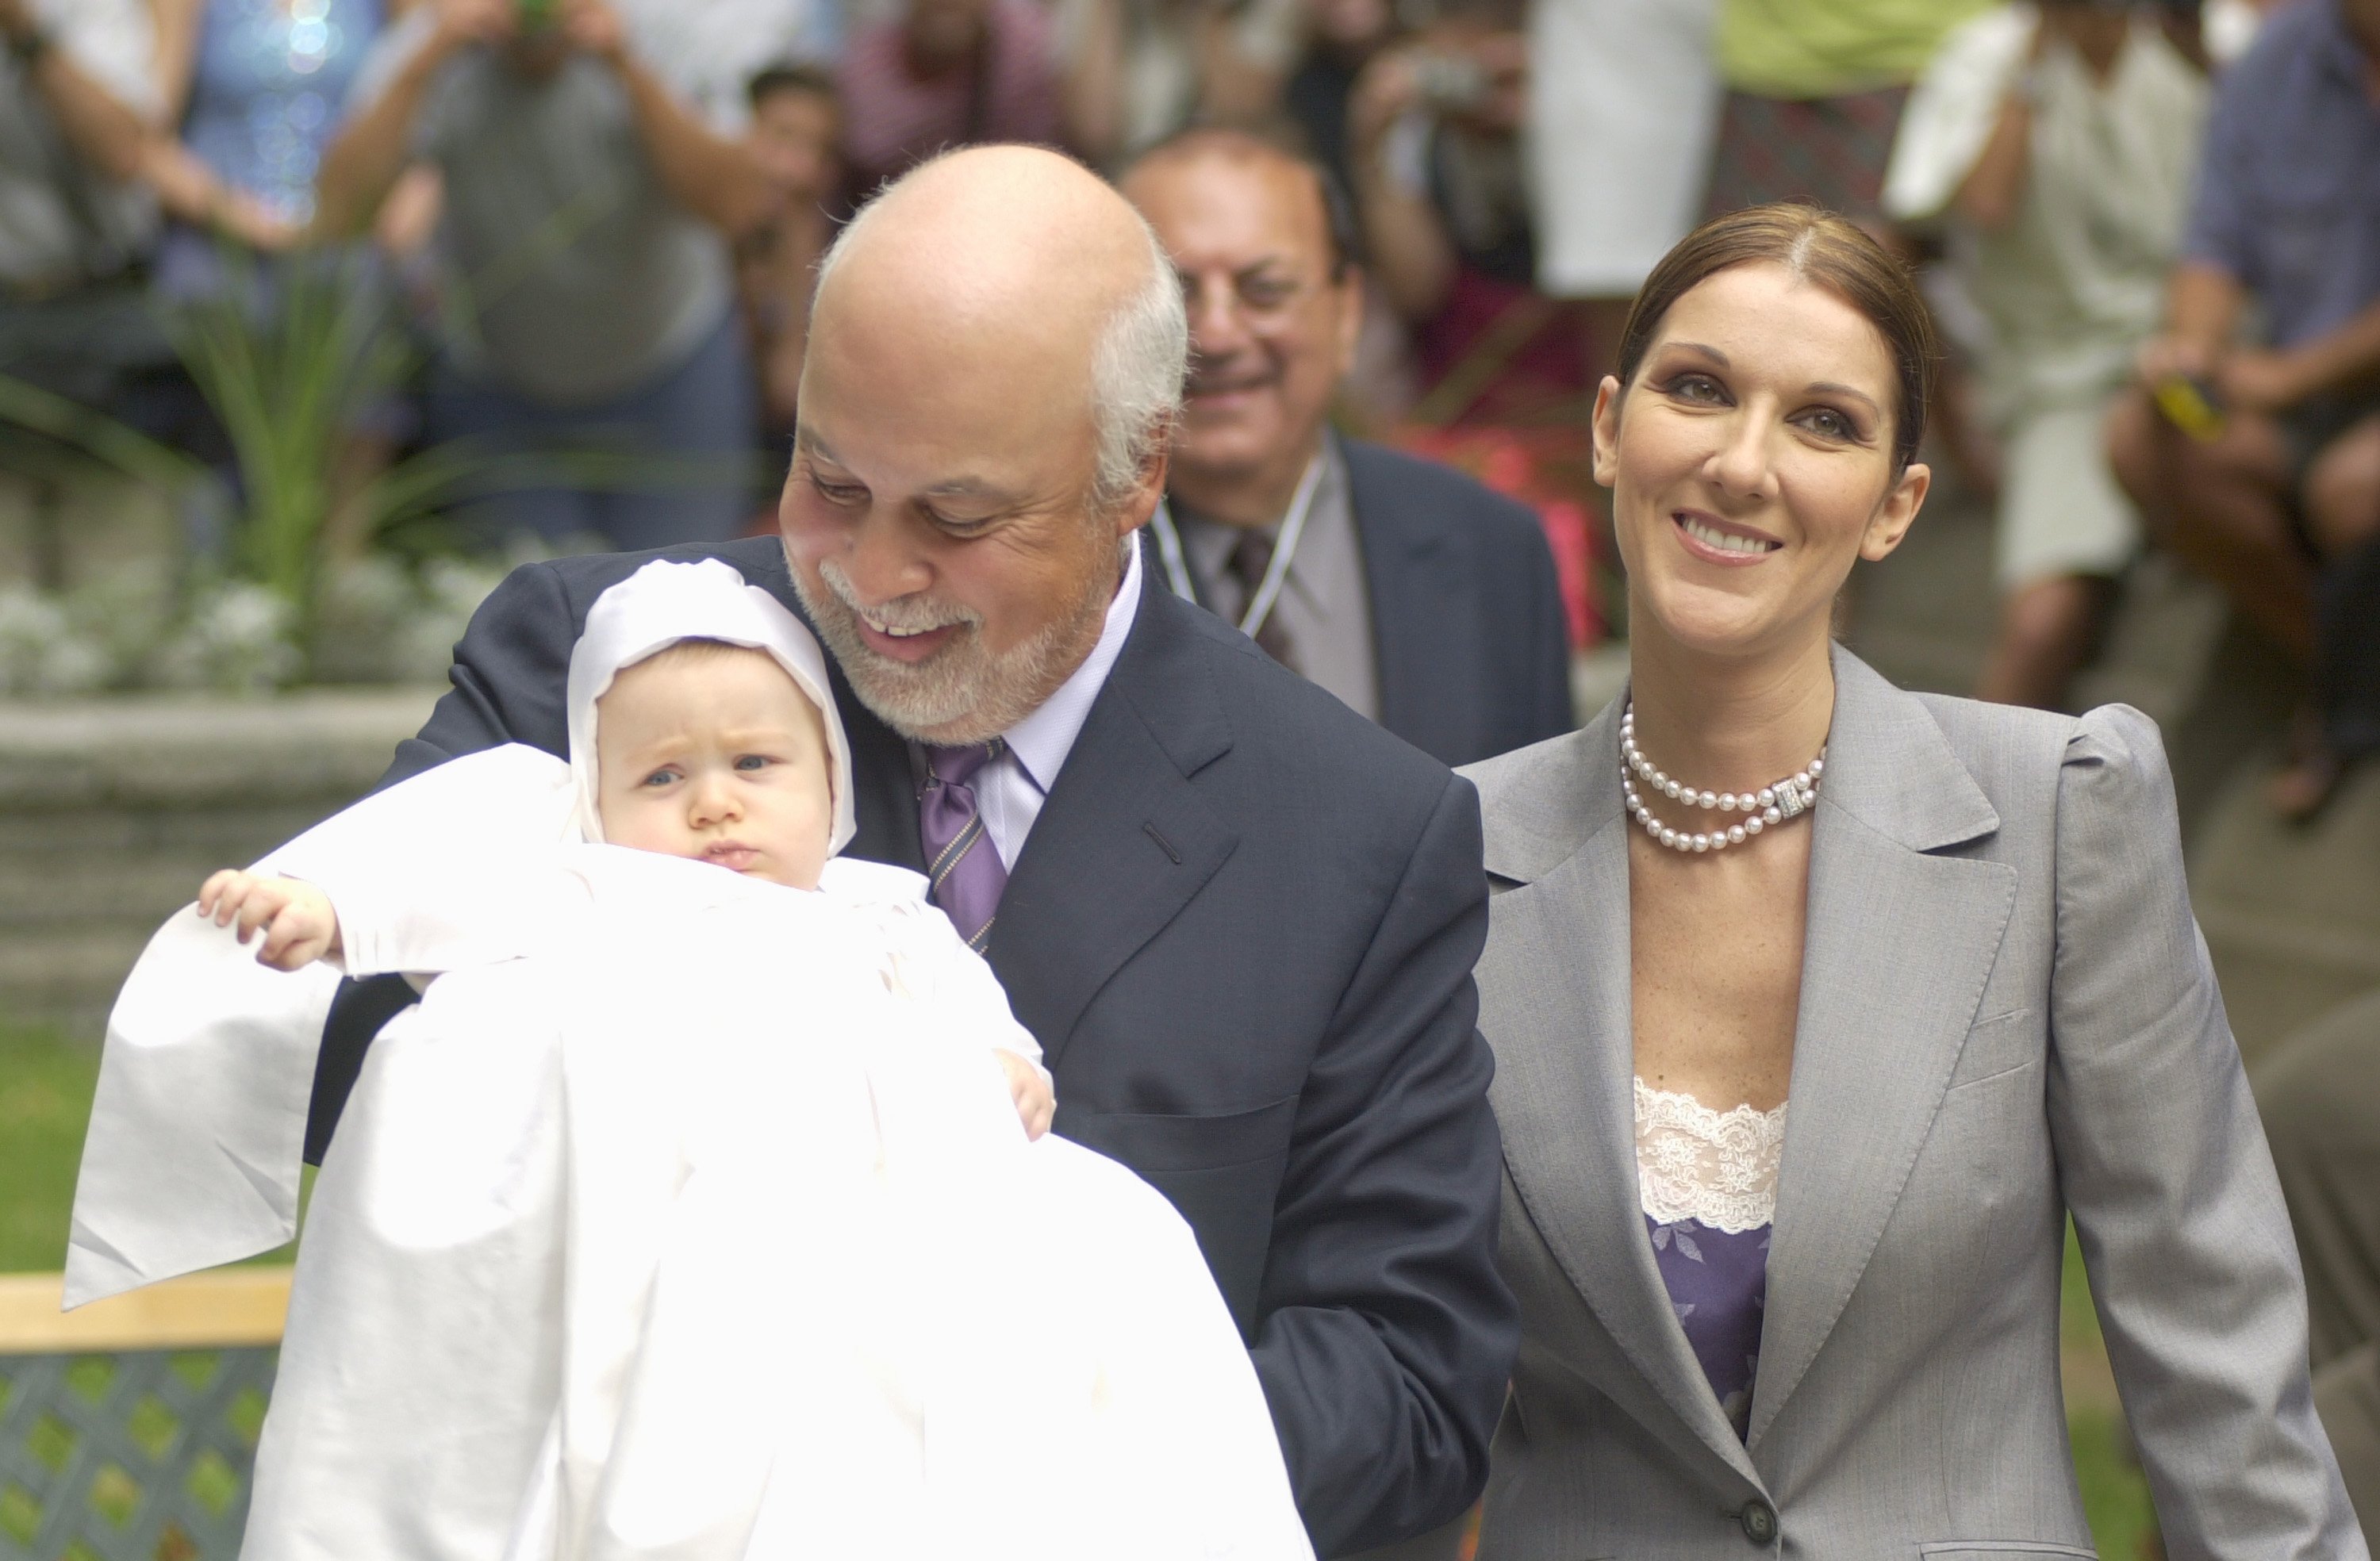 Pop star Celine Dion pictured with her husband, Rene Angelil, who holds their son Rene-Charles on July 25, 2001 at the chapel of the Notre-Dame Basilica in Montreal, Quebec. / Source: Getty Images